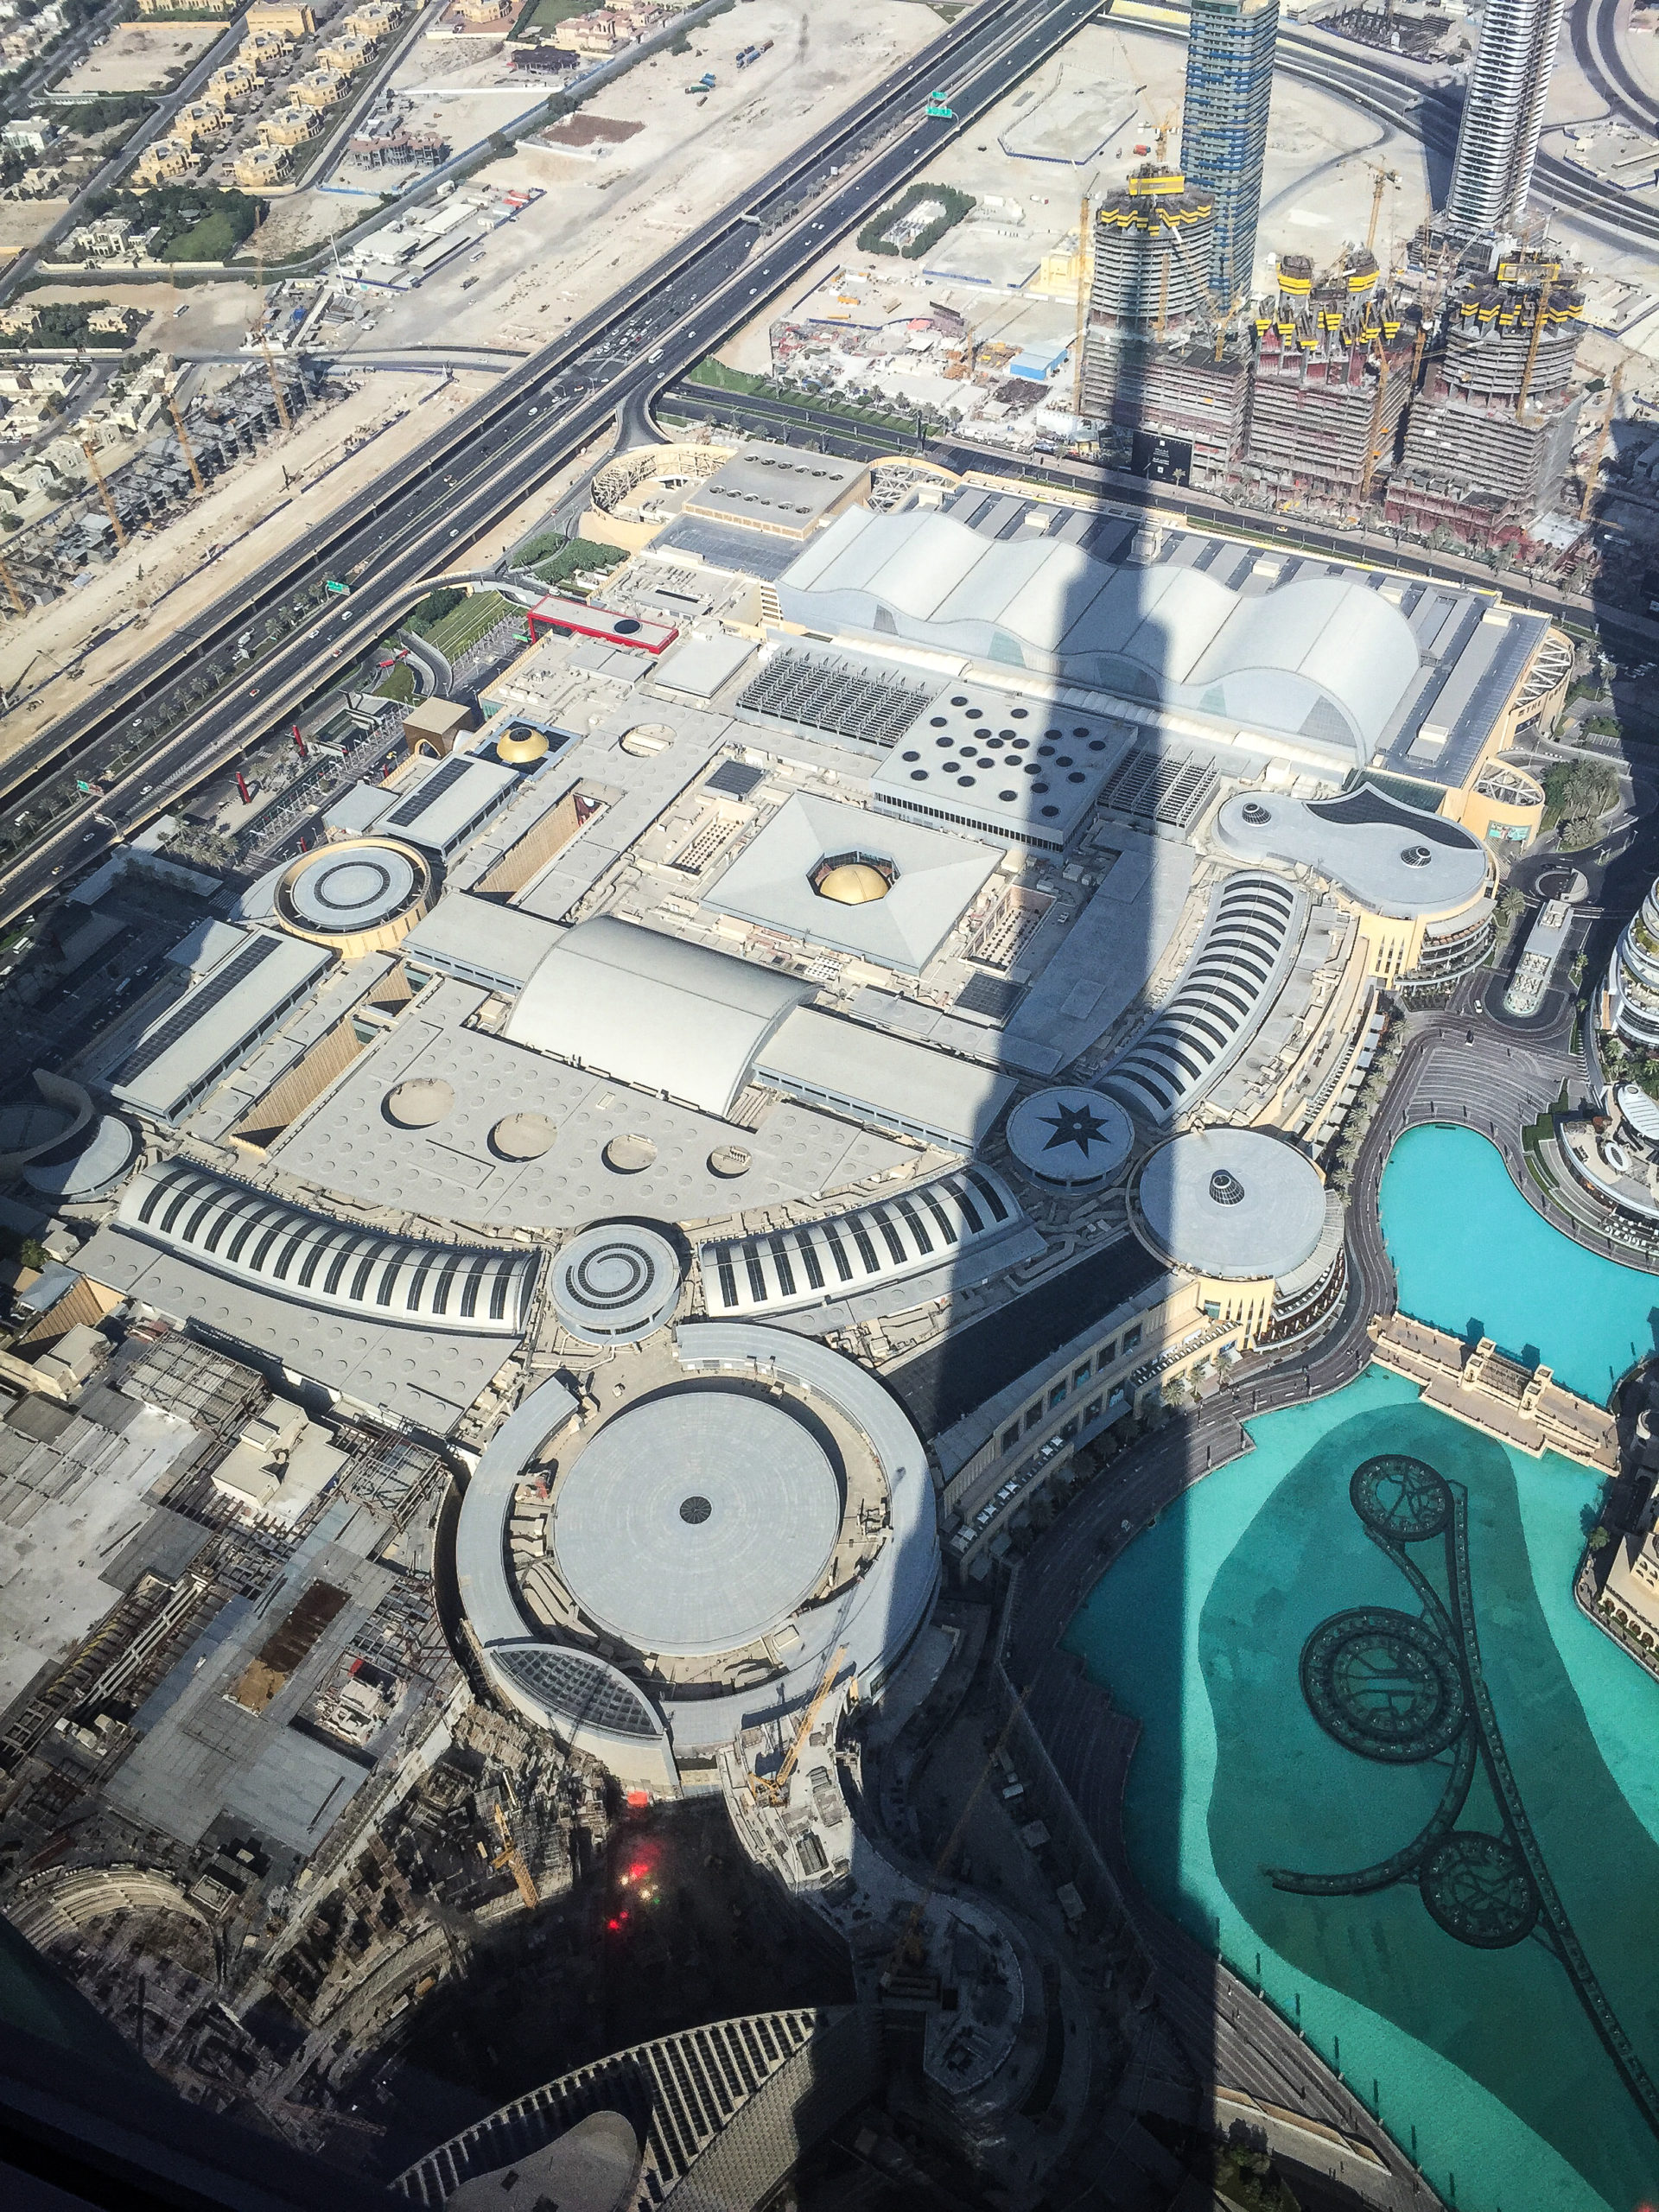 View over Dubai from the top of the Burj Khalifa with its shadow in Dubai